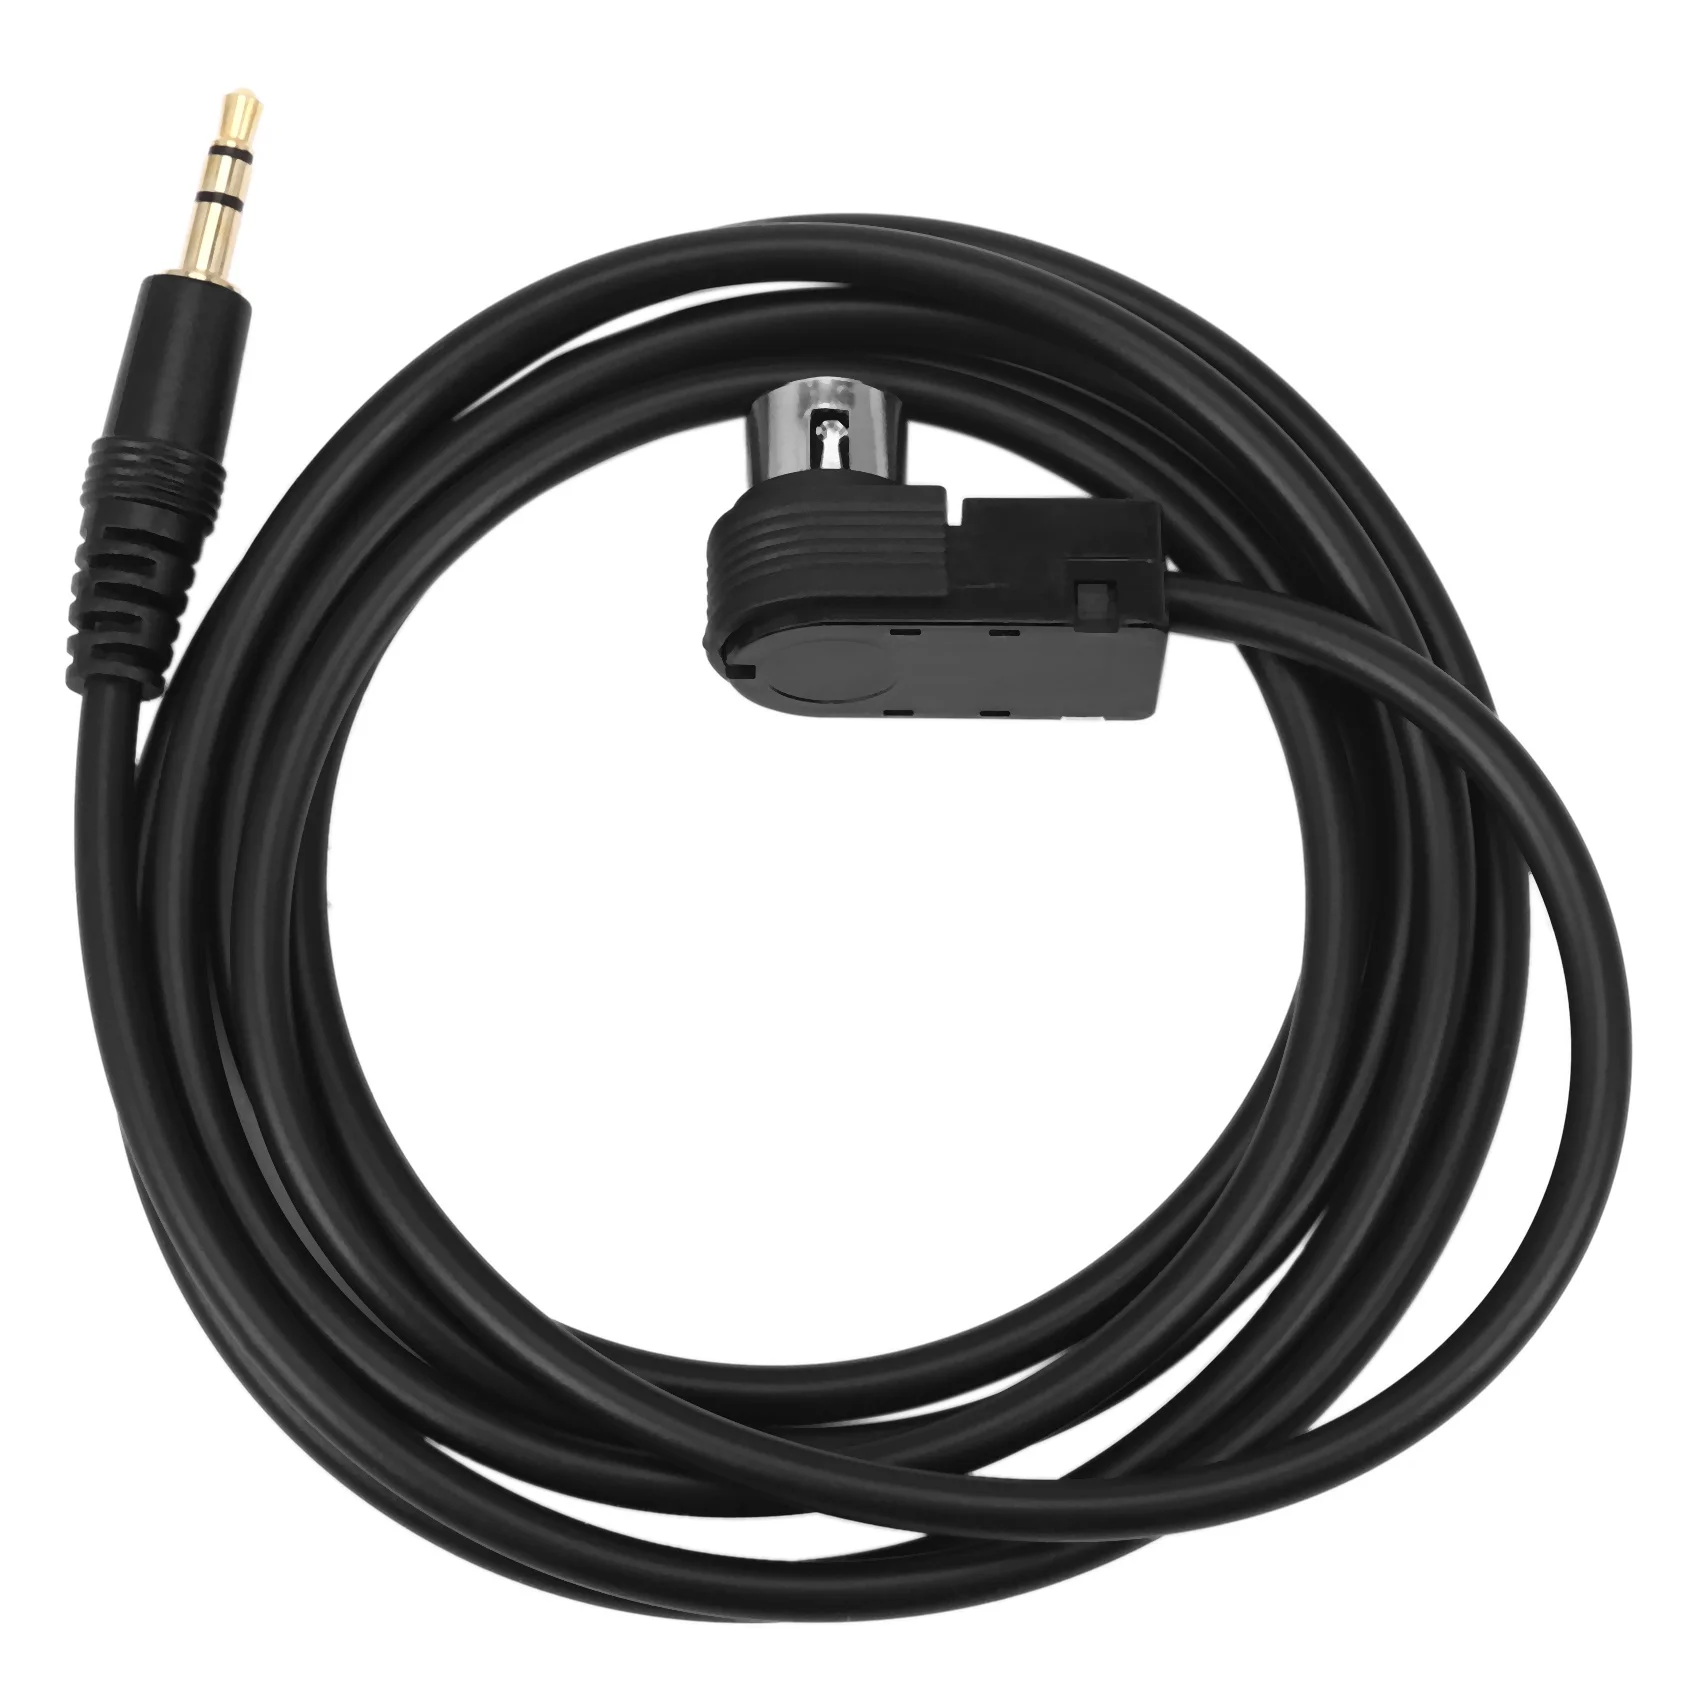 

Car 3.5mm Stereo Mini Jack For ALPINE/JVC Ai-NET 4FT 100cm Aux Car Audio Cable Fit for Adapter for Phone